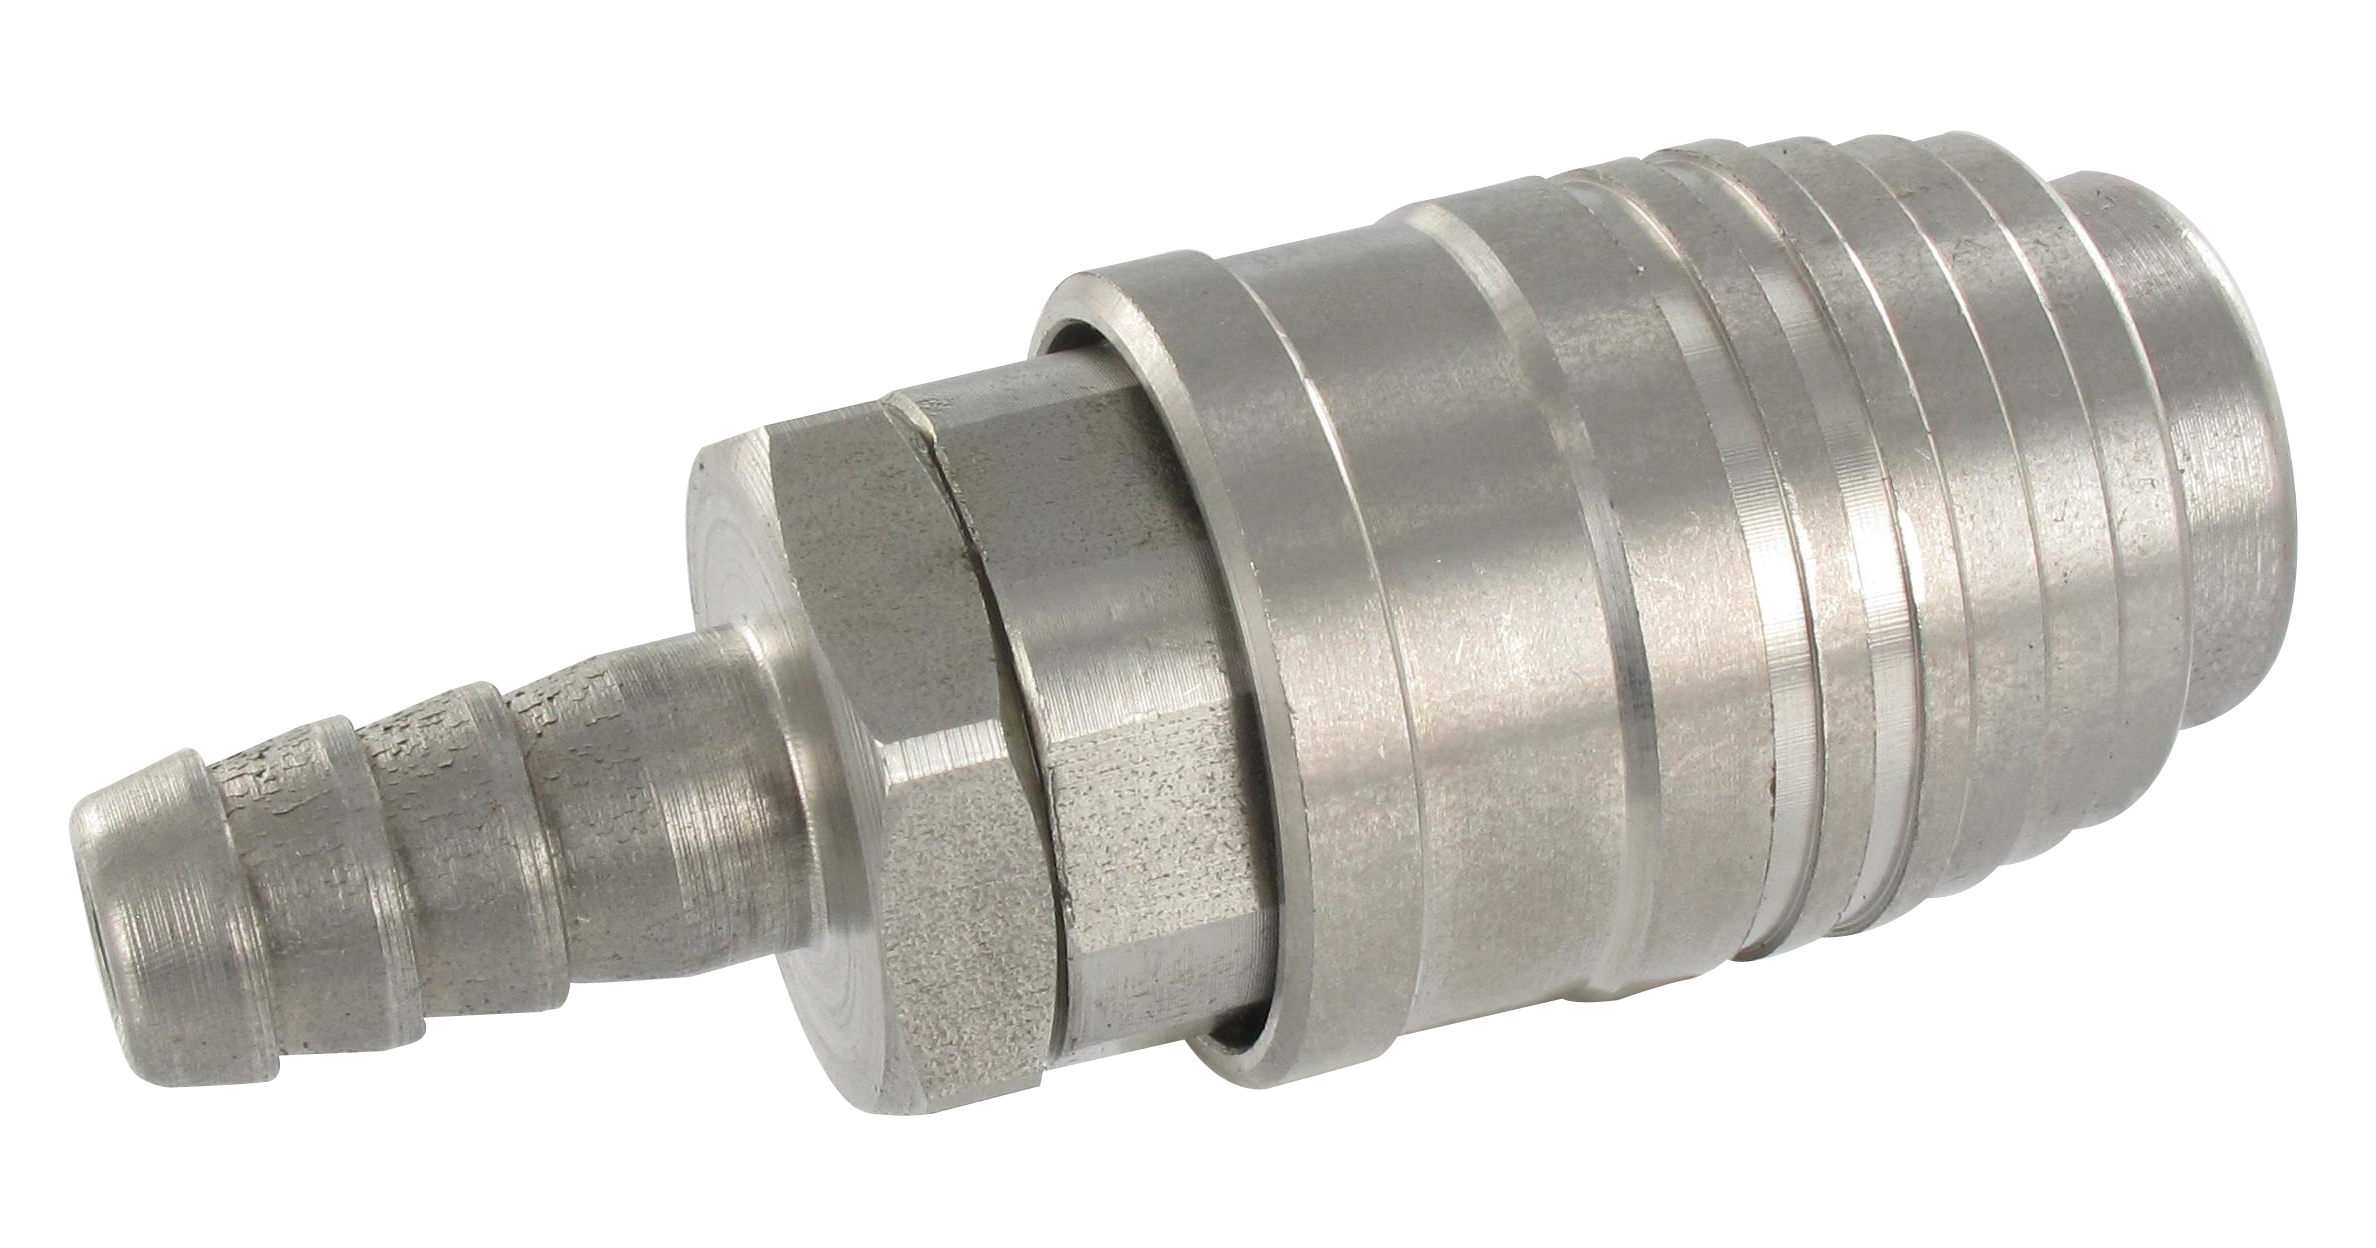 ISO-B barb connector couplings with 5.5 mm bore in stainless steel 303